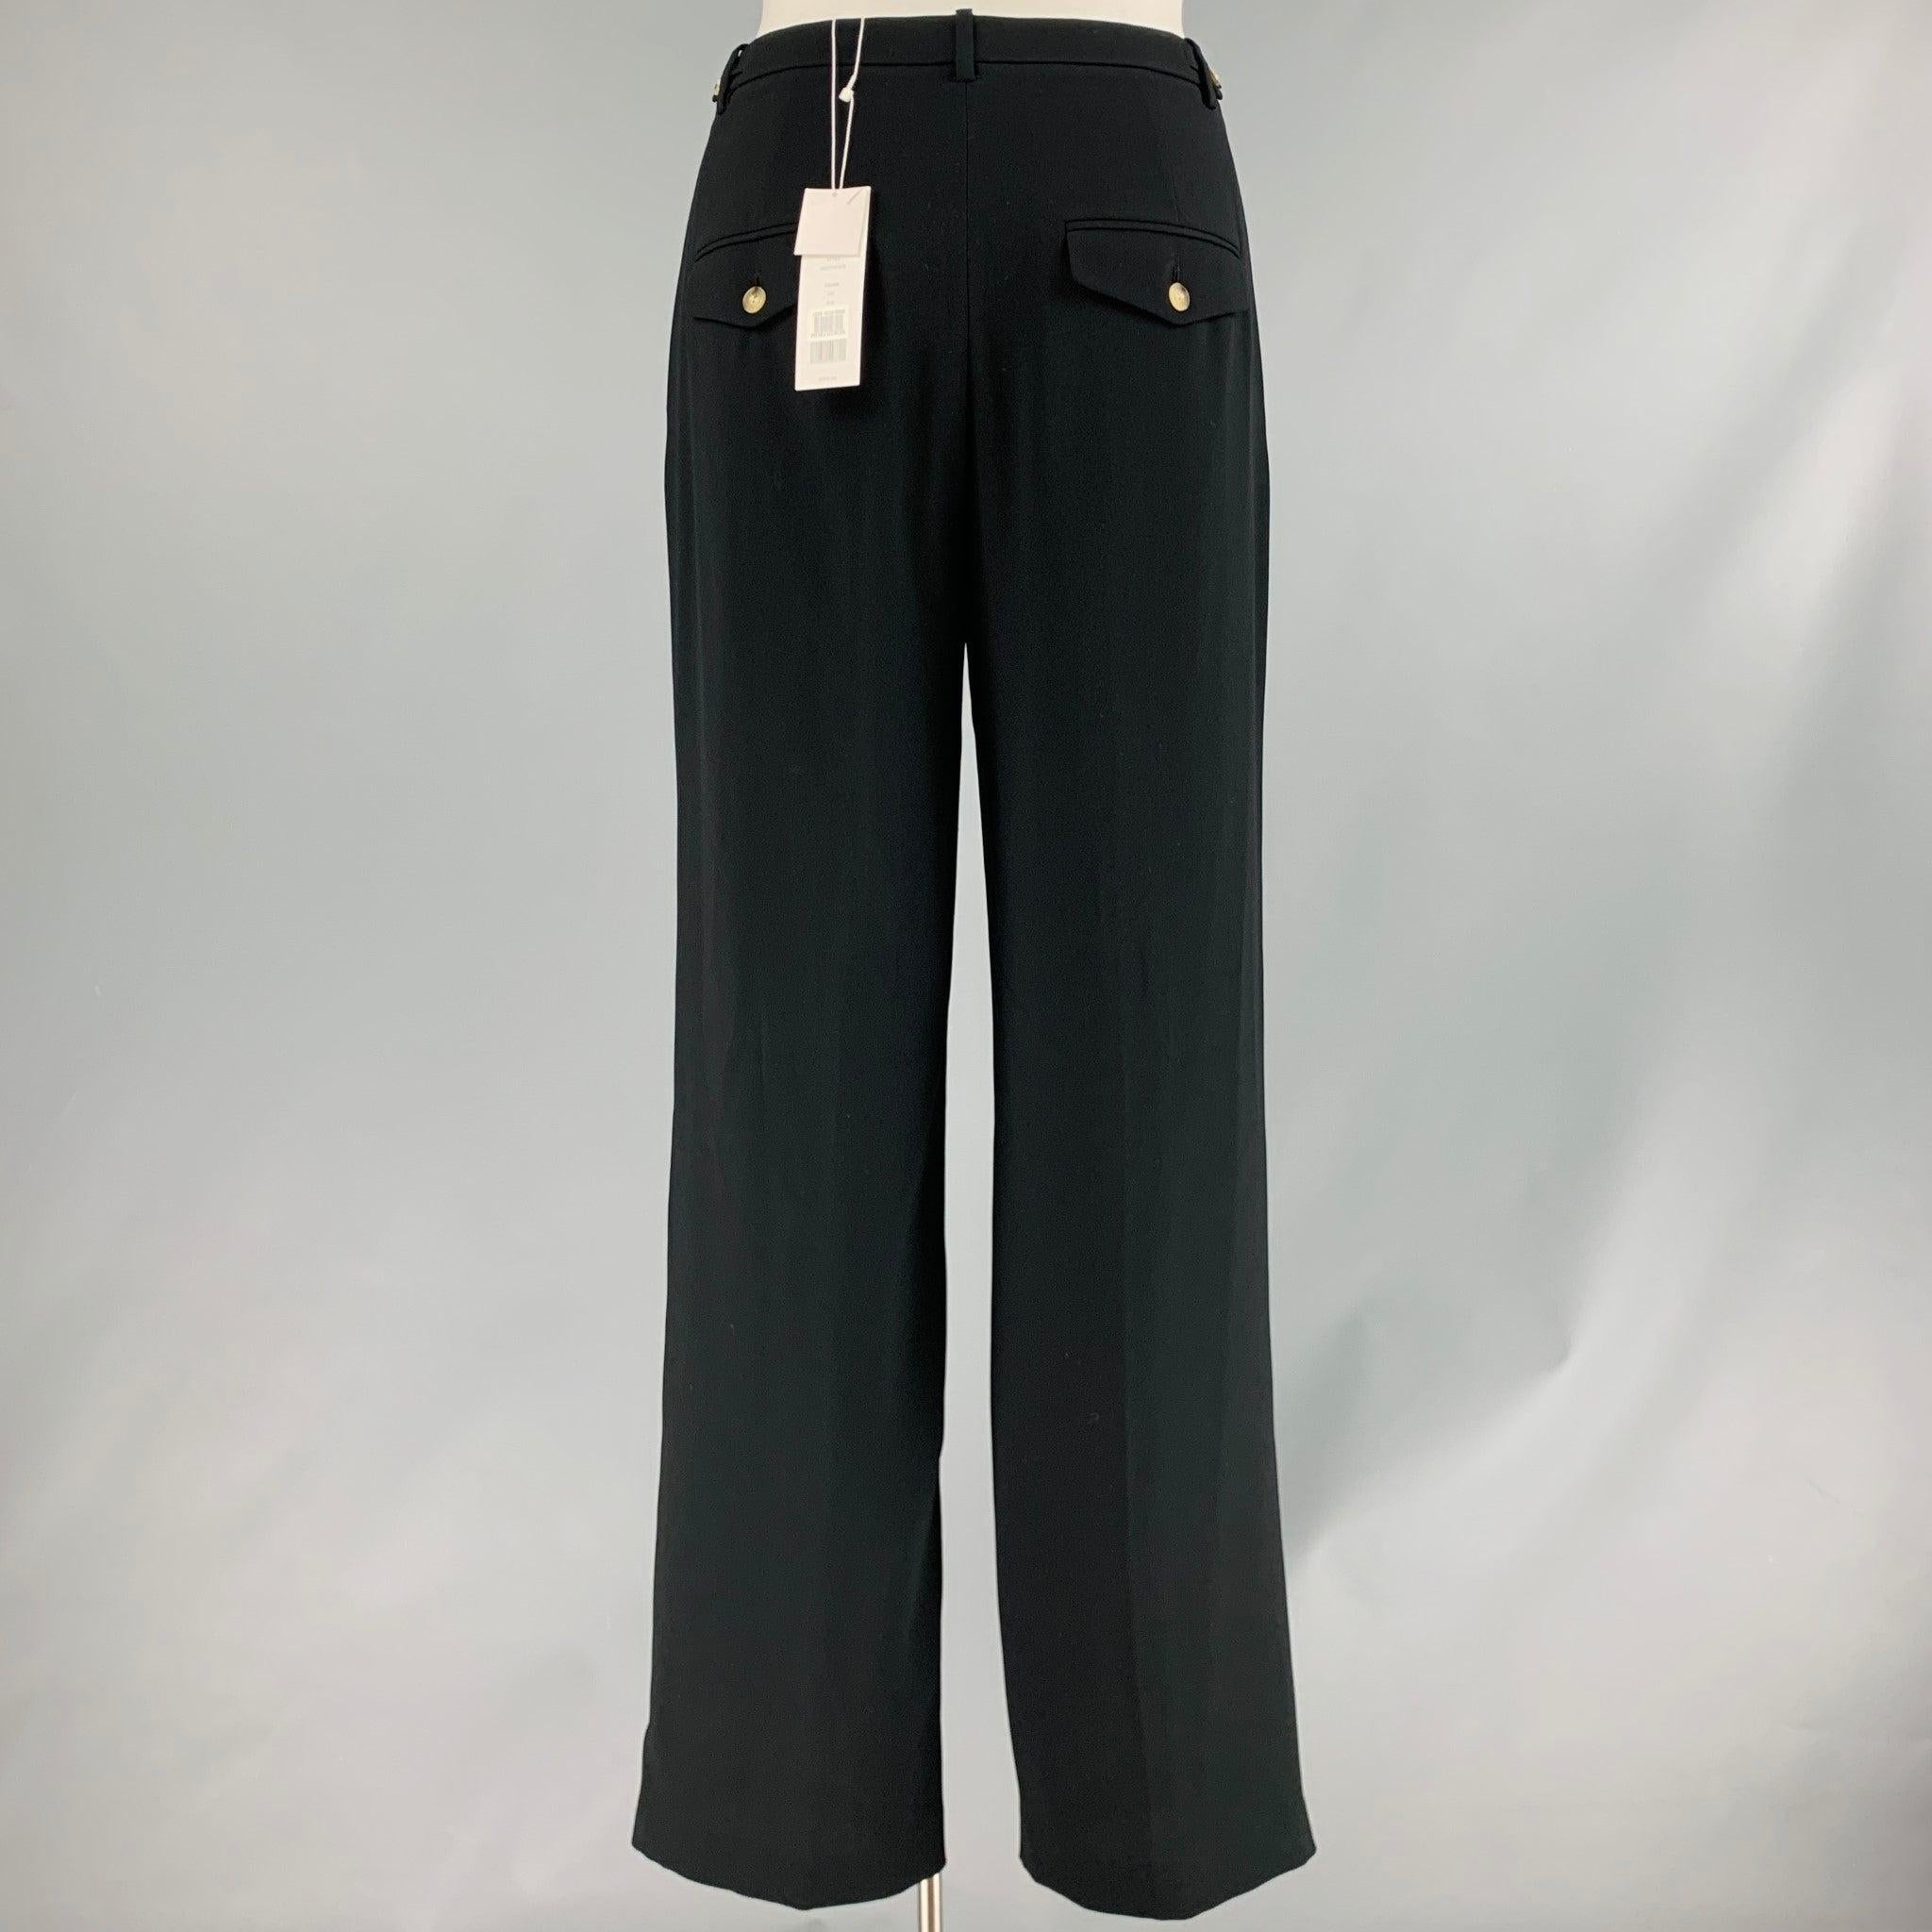 VINCE Size 12 Black Triacetate Blend Zip Fly Dress Pants In Excellent Condition For Sale In San Francisco, CA